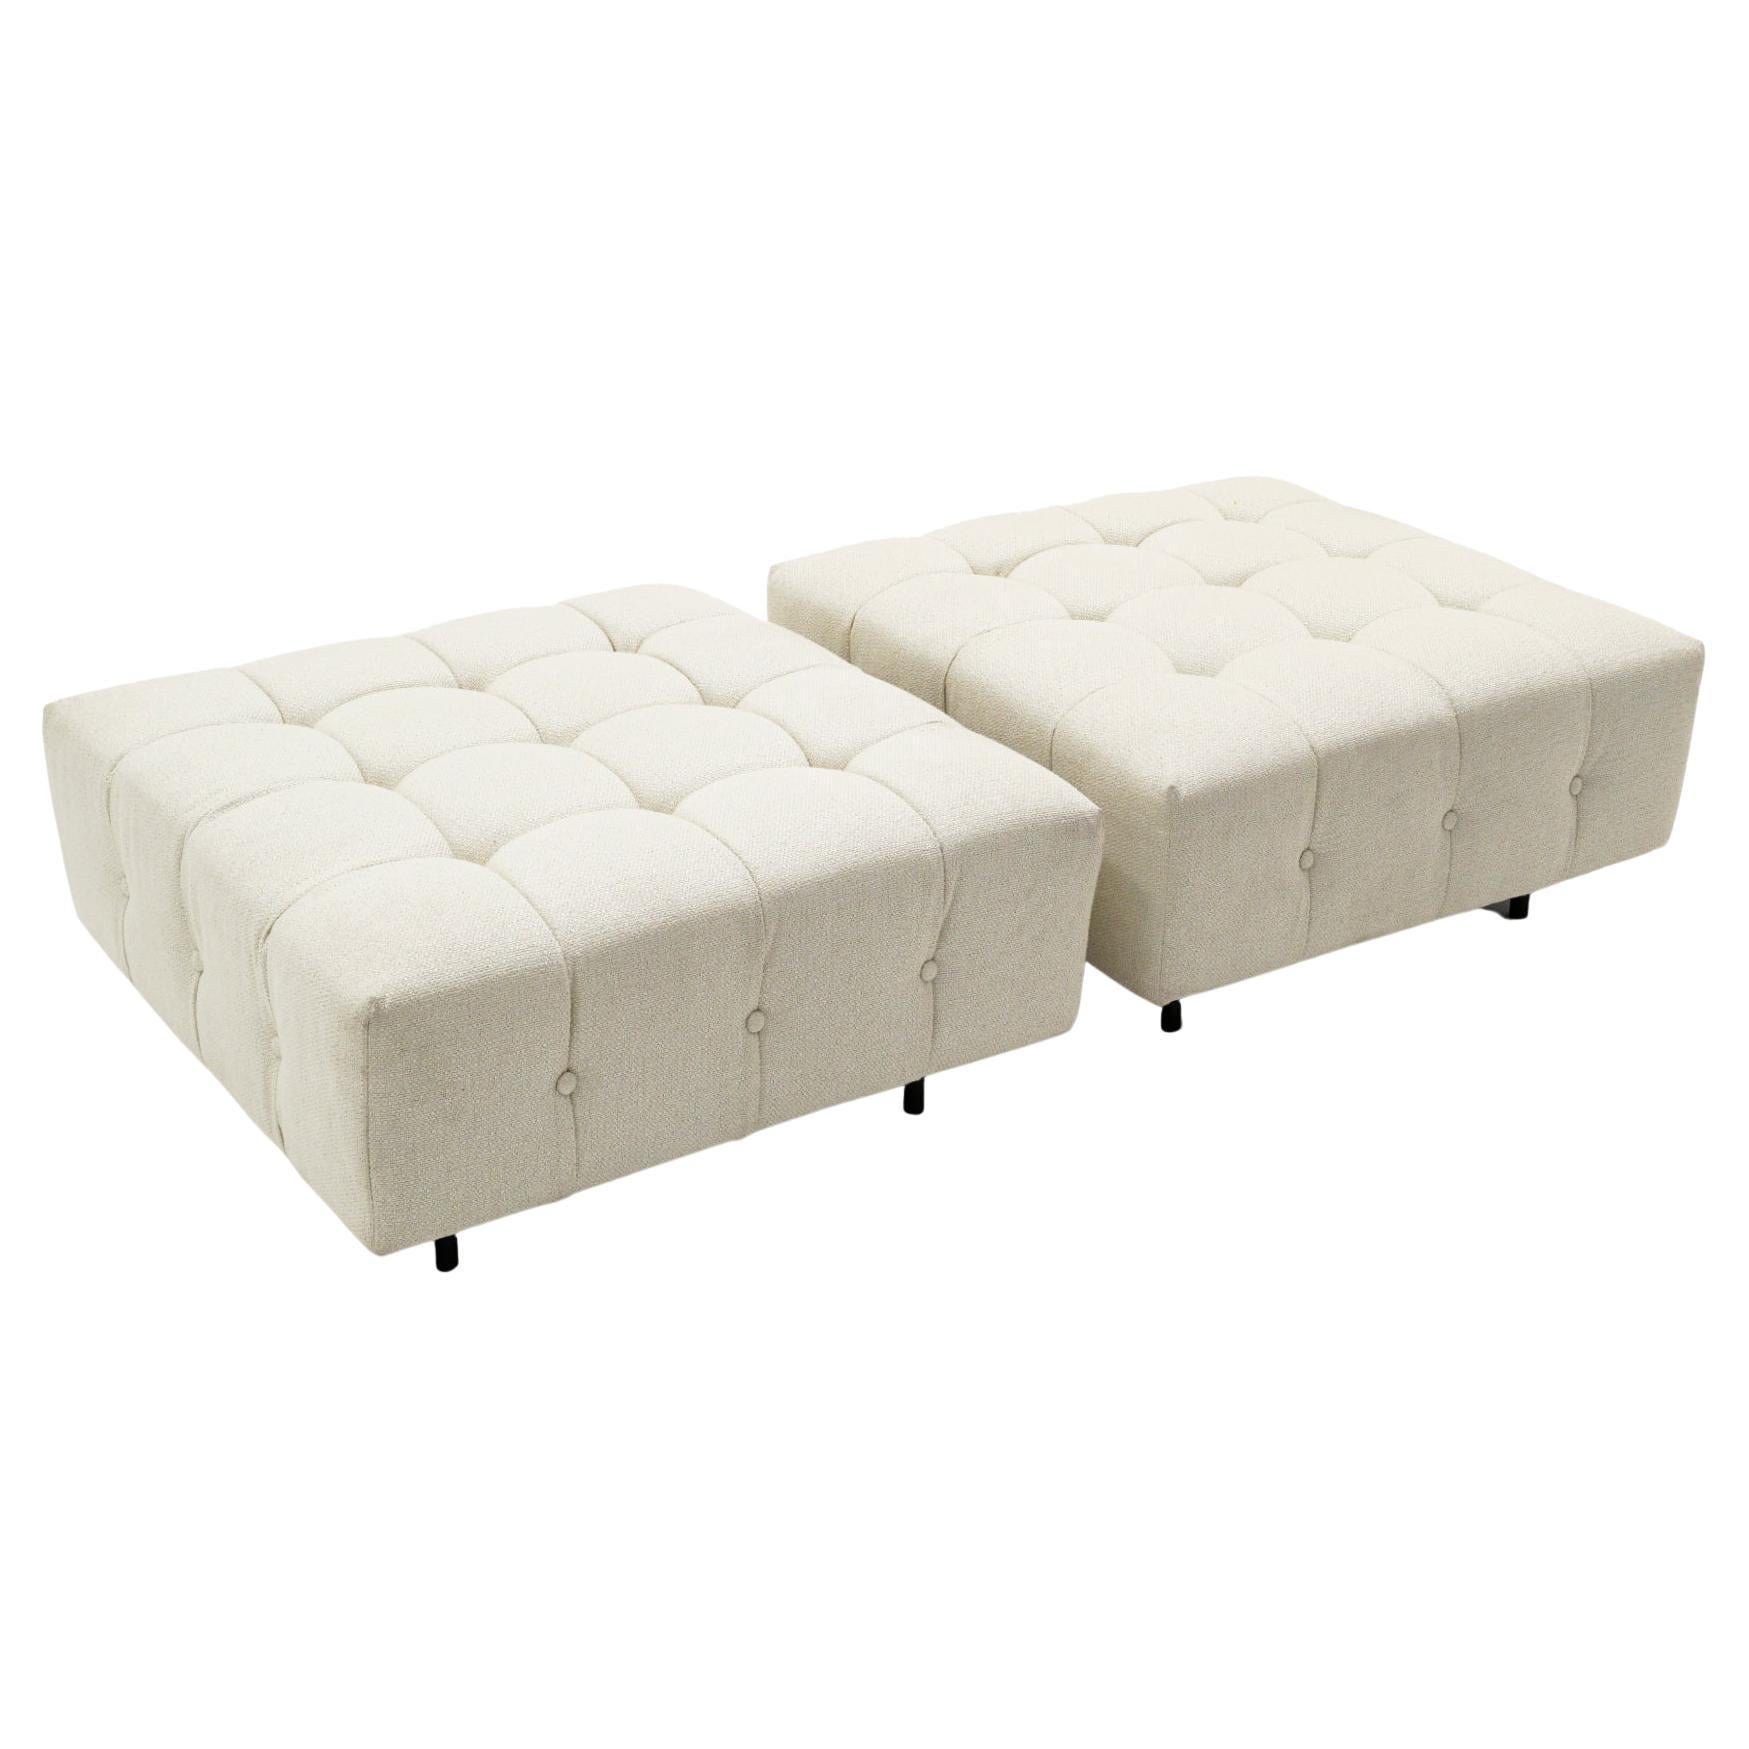 Pair of Ottomans by Harvey Probber, New White Upholstery, Signed, Ready to Use For Sale